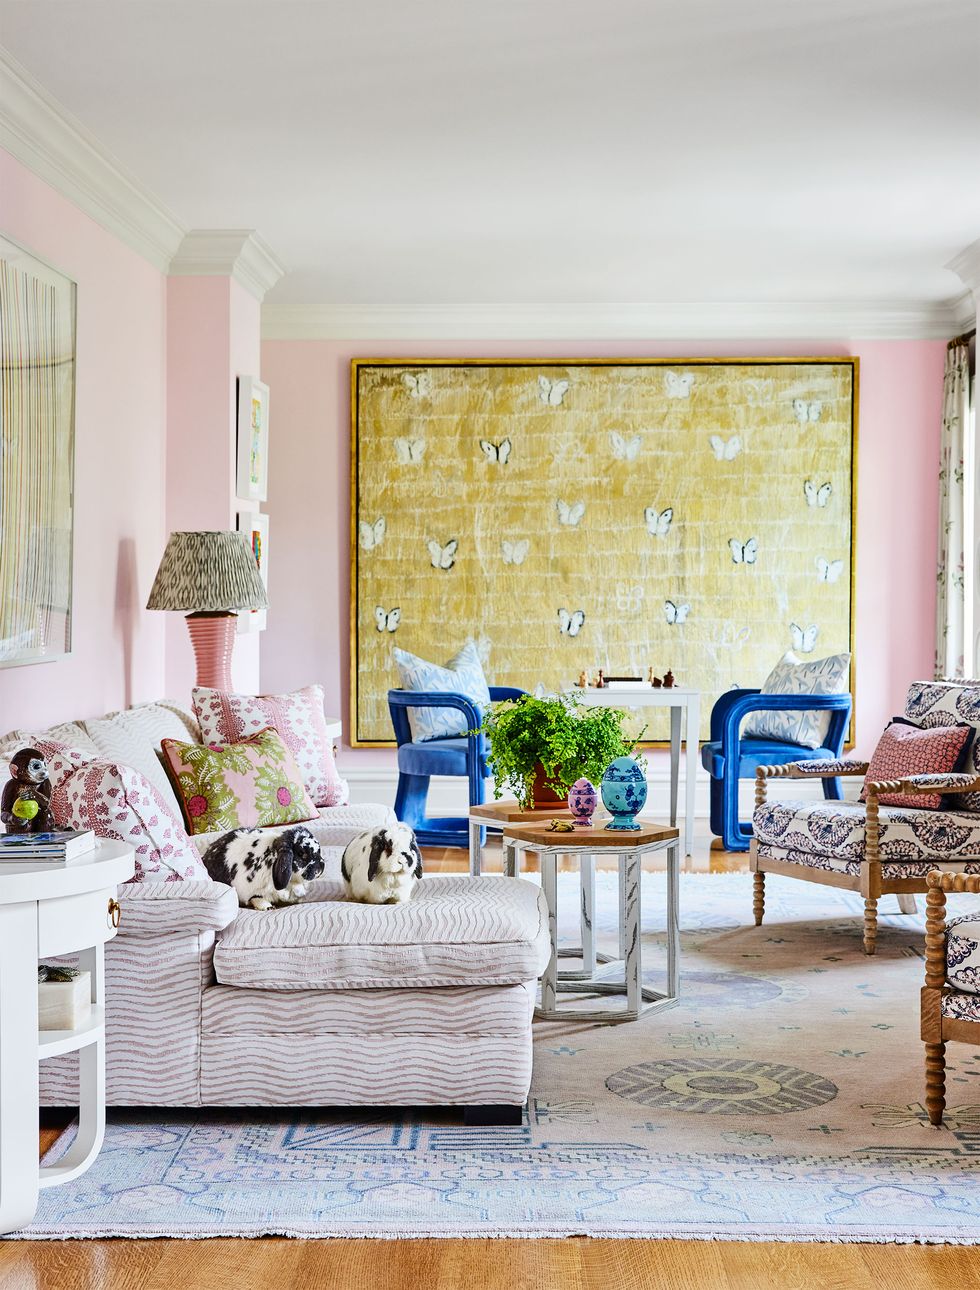 in the tv room with pink walls is an upholstered sofa, two chairs with carved wood arms and cocktail tables, and in the background are blue chairs and a large artwork with butterflies